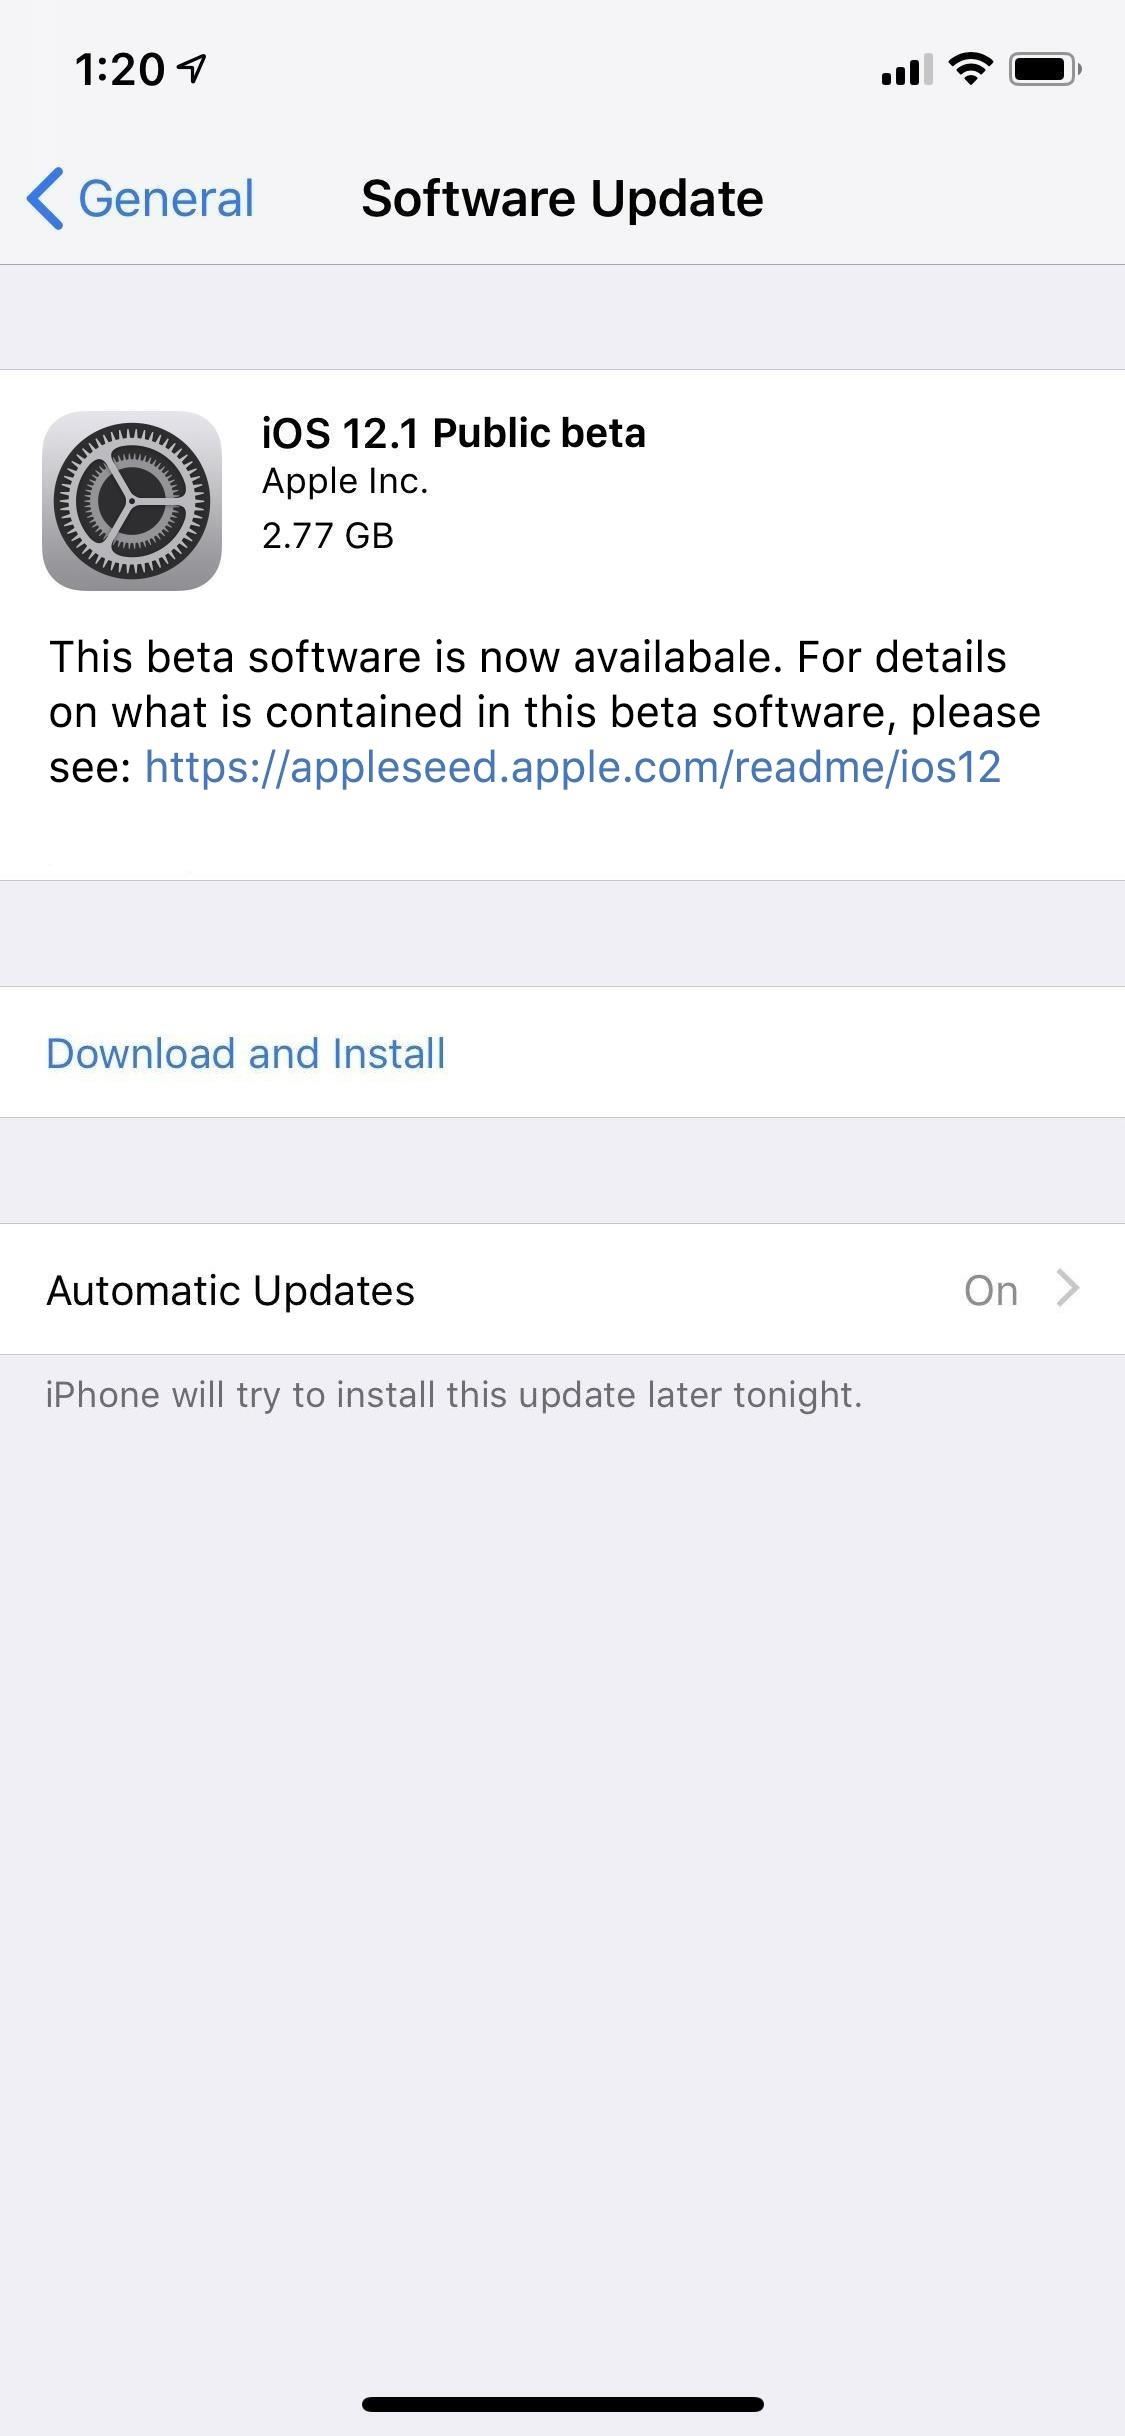 Apple Releases iOS 12.1 Beta 1 to Public Software Testers, Reintroduces Group FaceTime to iPhones